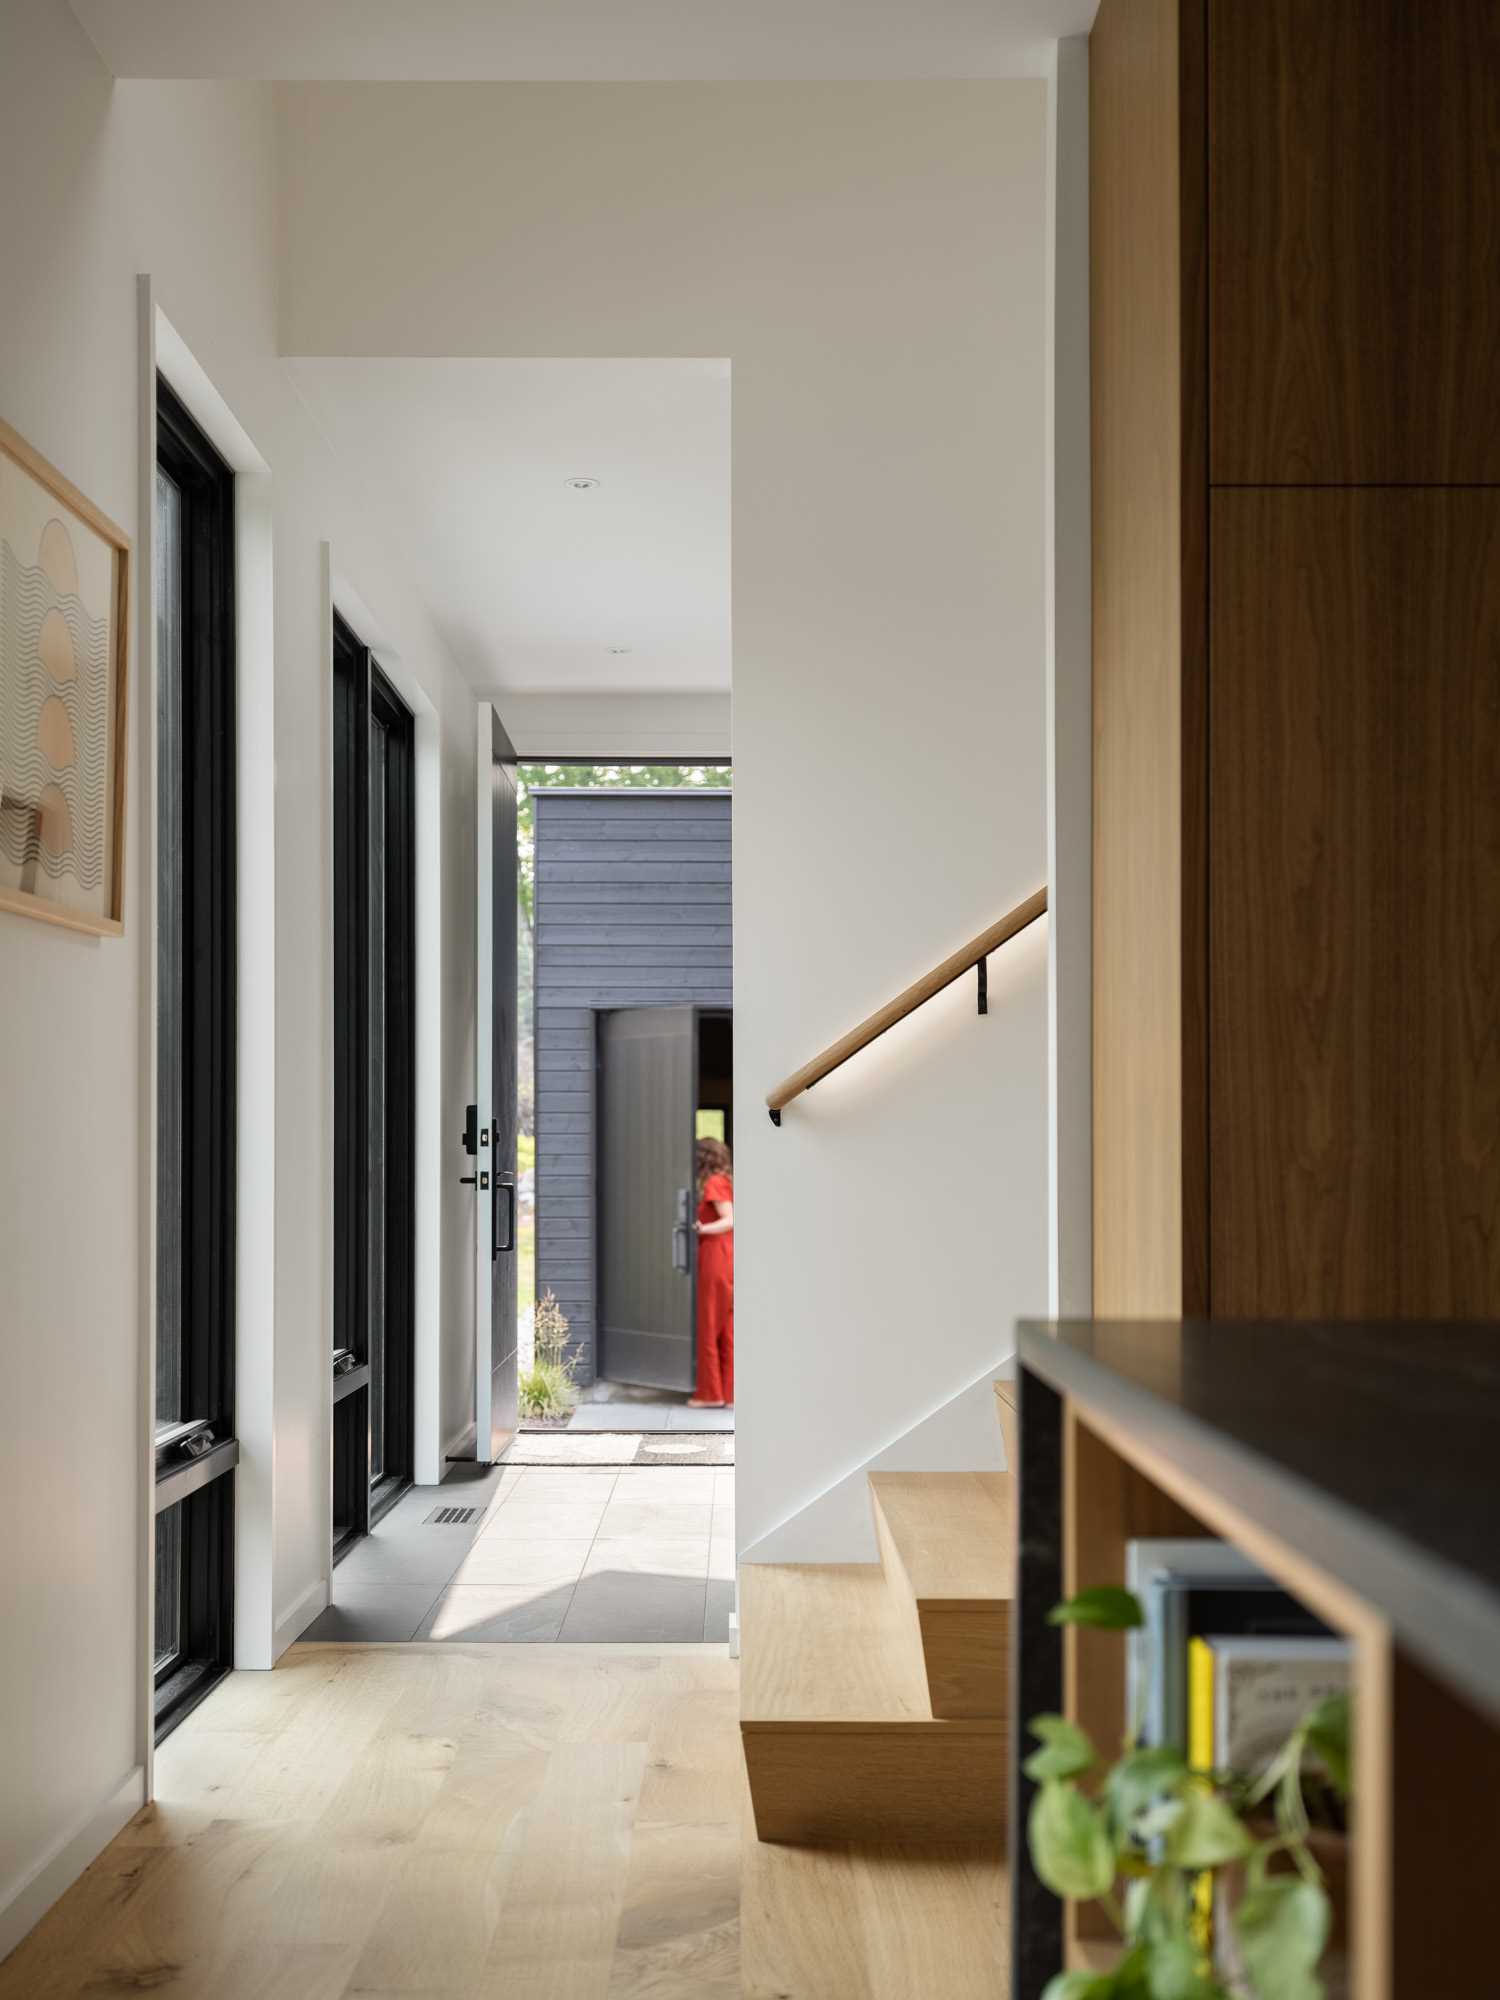 Wood stairs lead to the upper floor of this modern home, while a handrail includes hidden lighting.